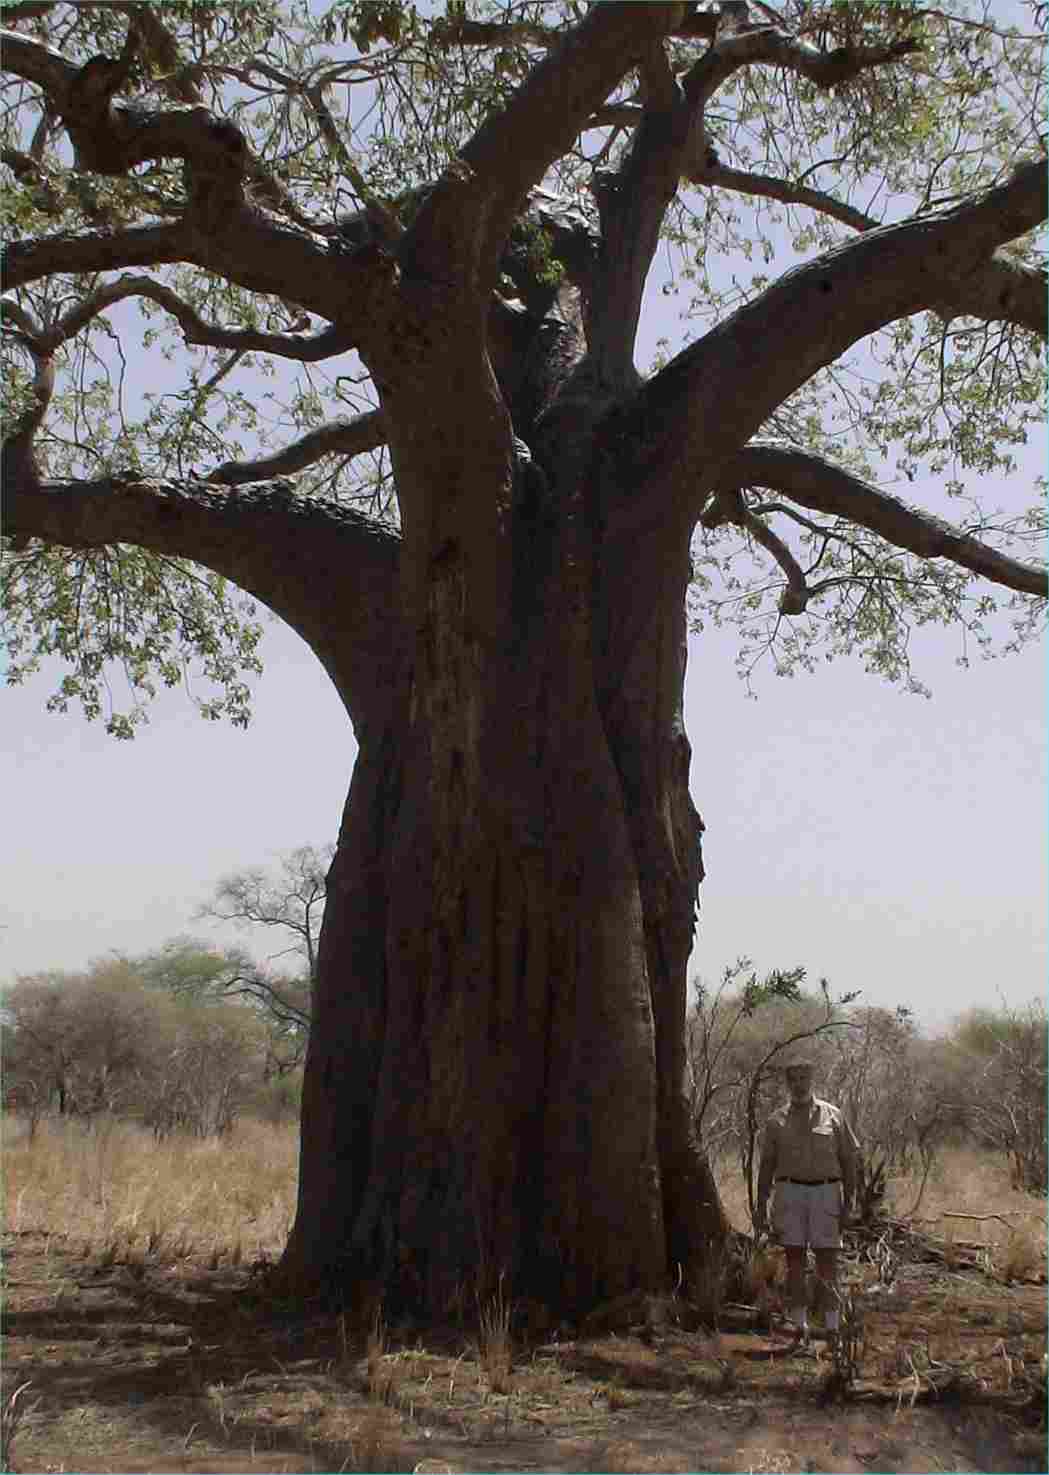 Jim shows how huge the Boabab tree is.  Elephants like to scrape off the bark and eat it.  Photo by FG, Dec. 2005.